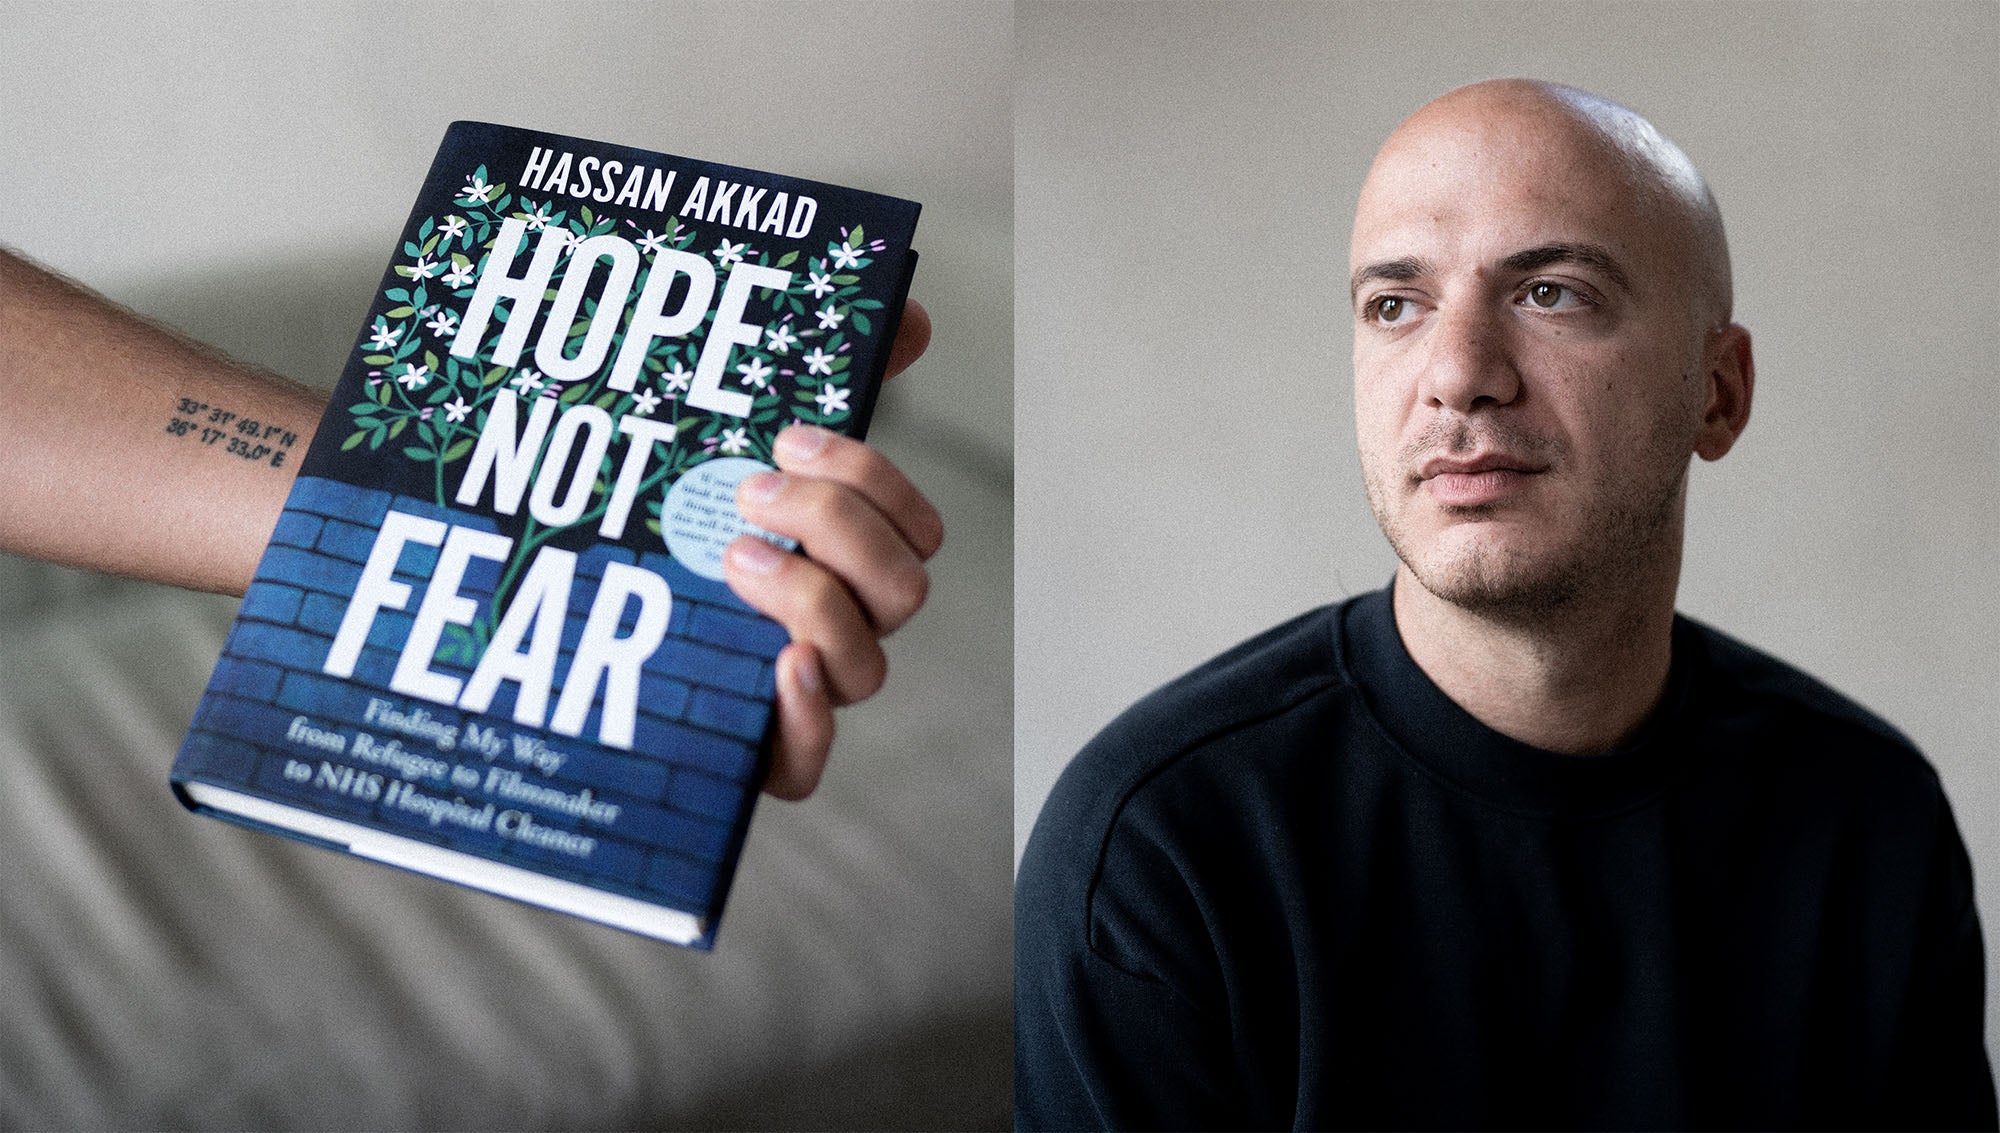 Image of Hassan Akkad and his book Hope Not Fear